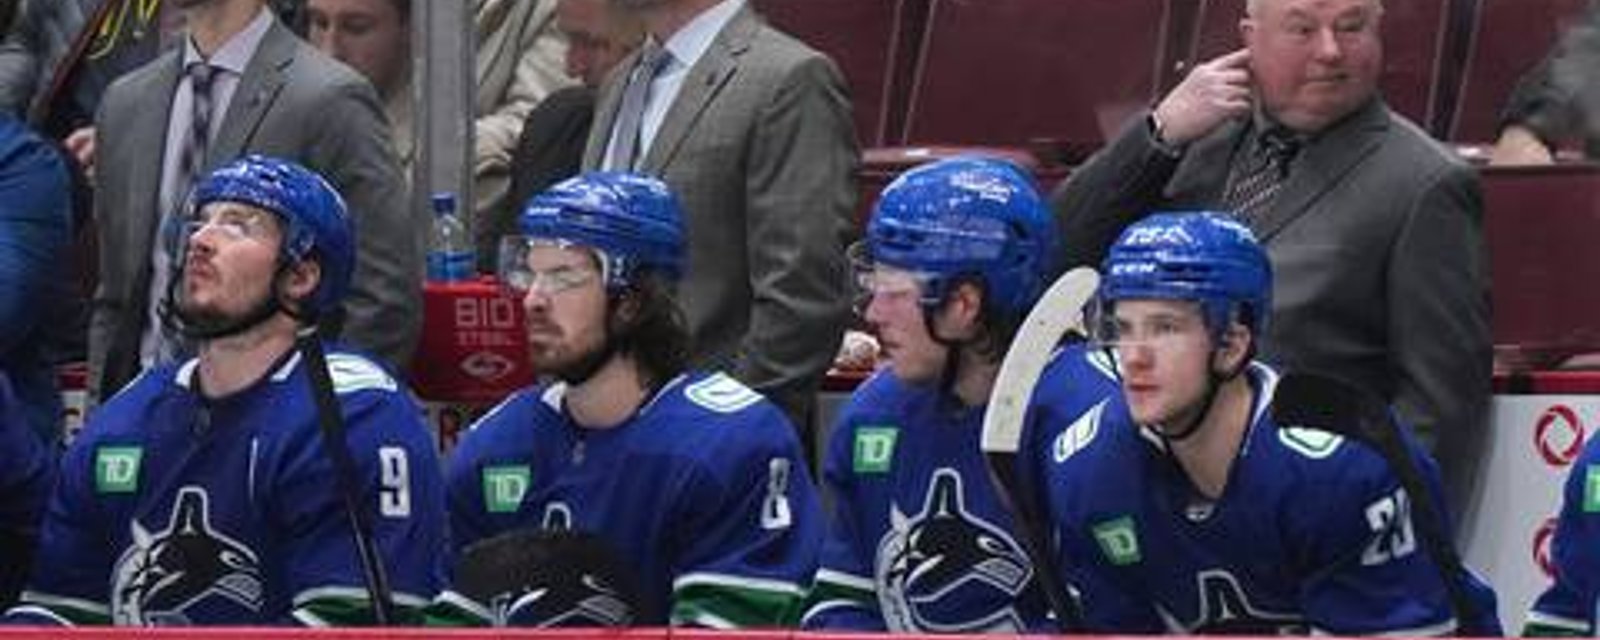 Canucks’ dressing room is “shellshocked”, players “want it to end”